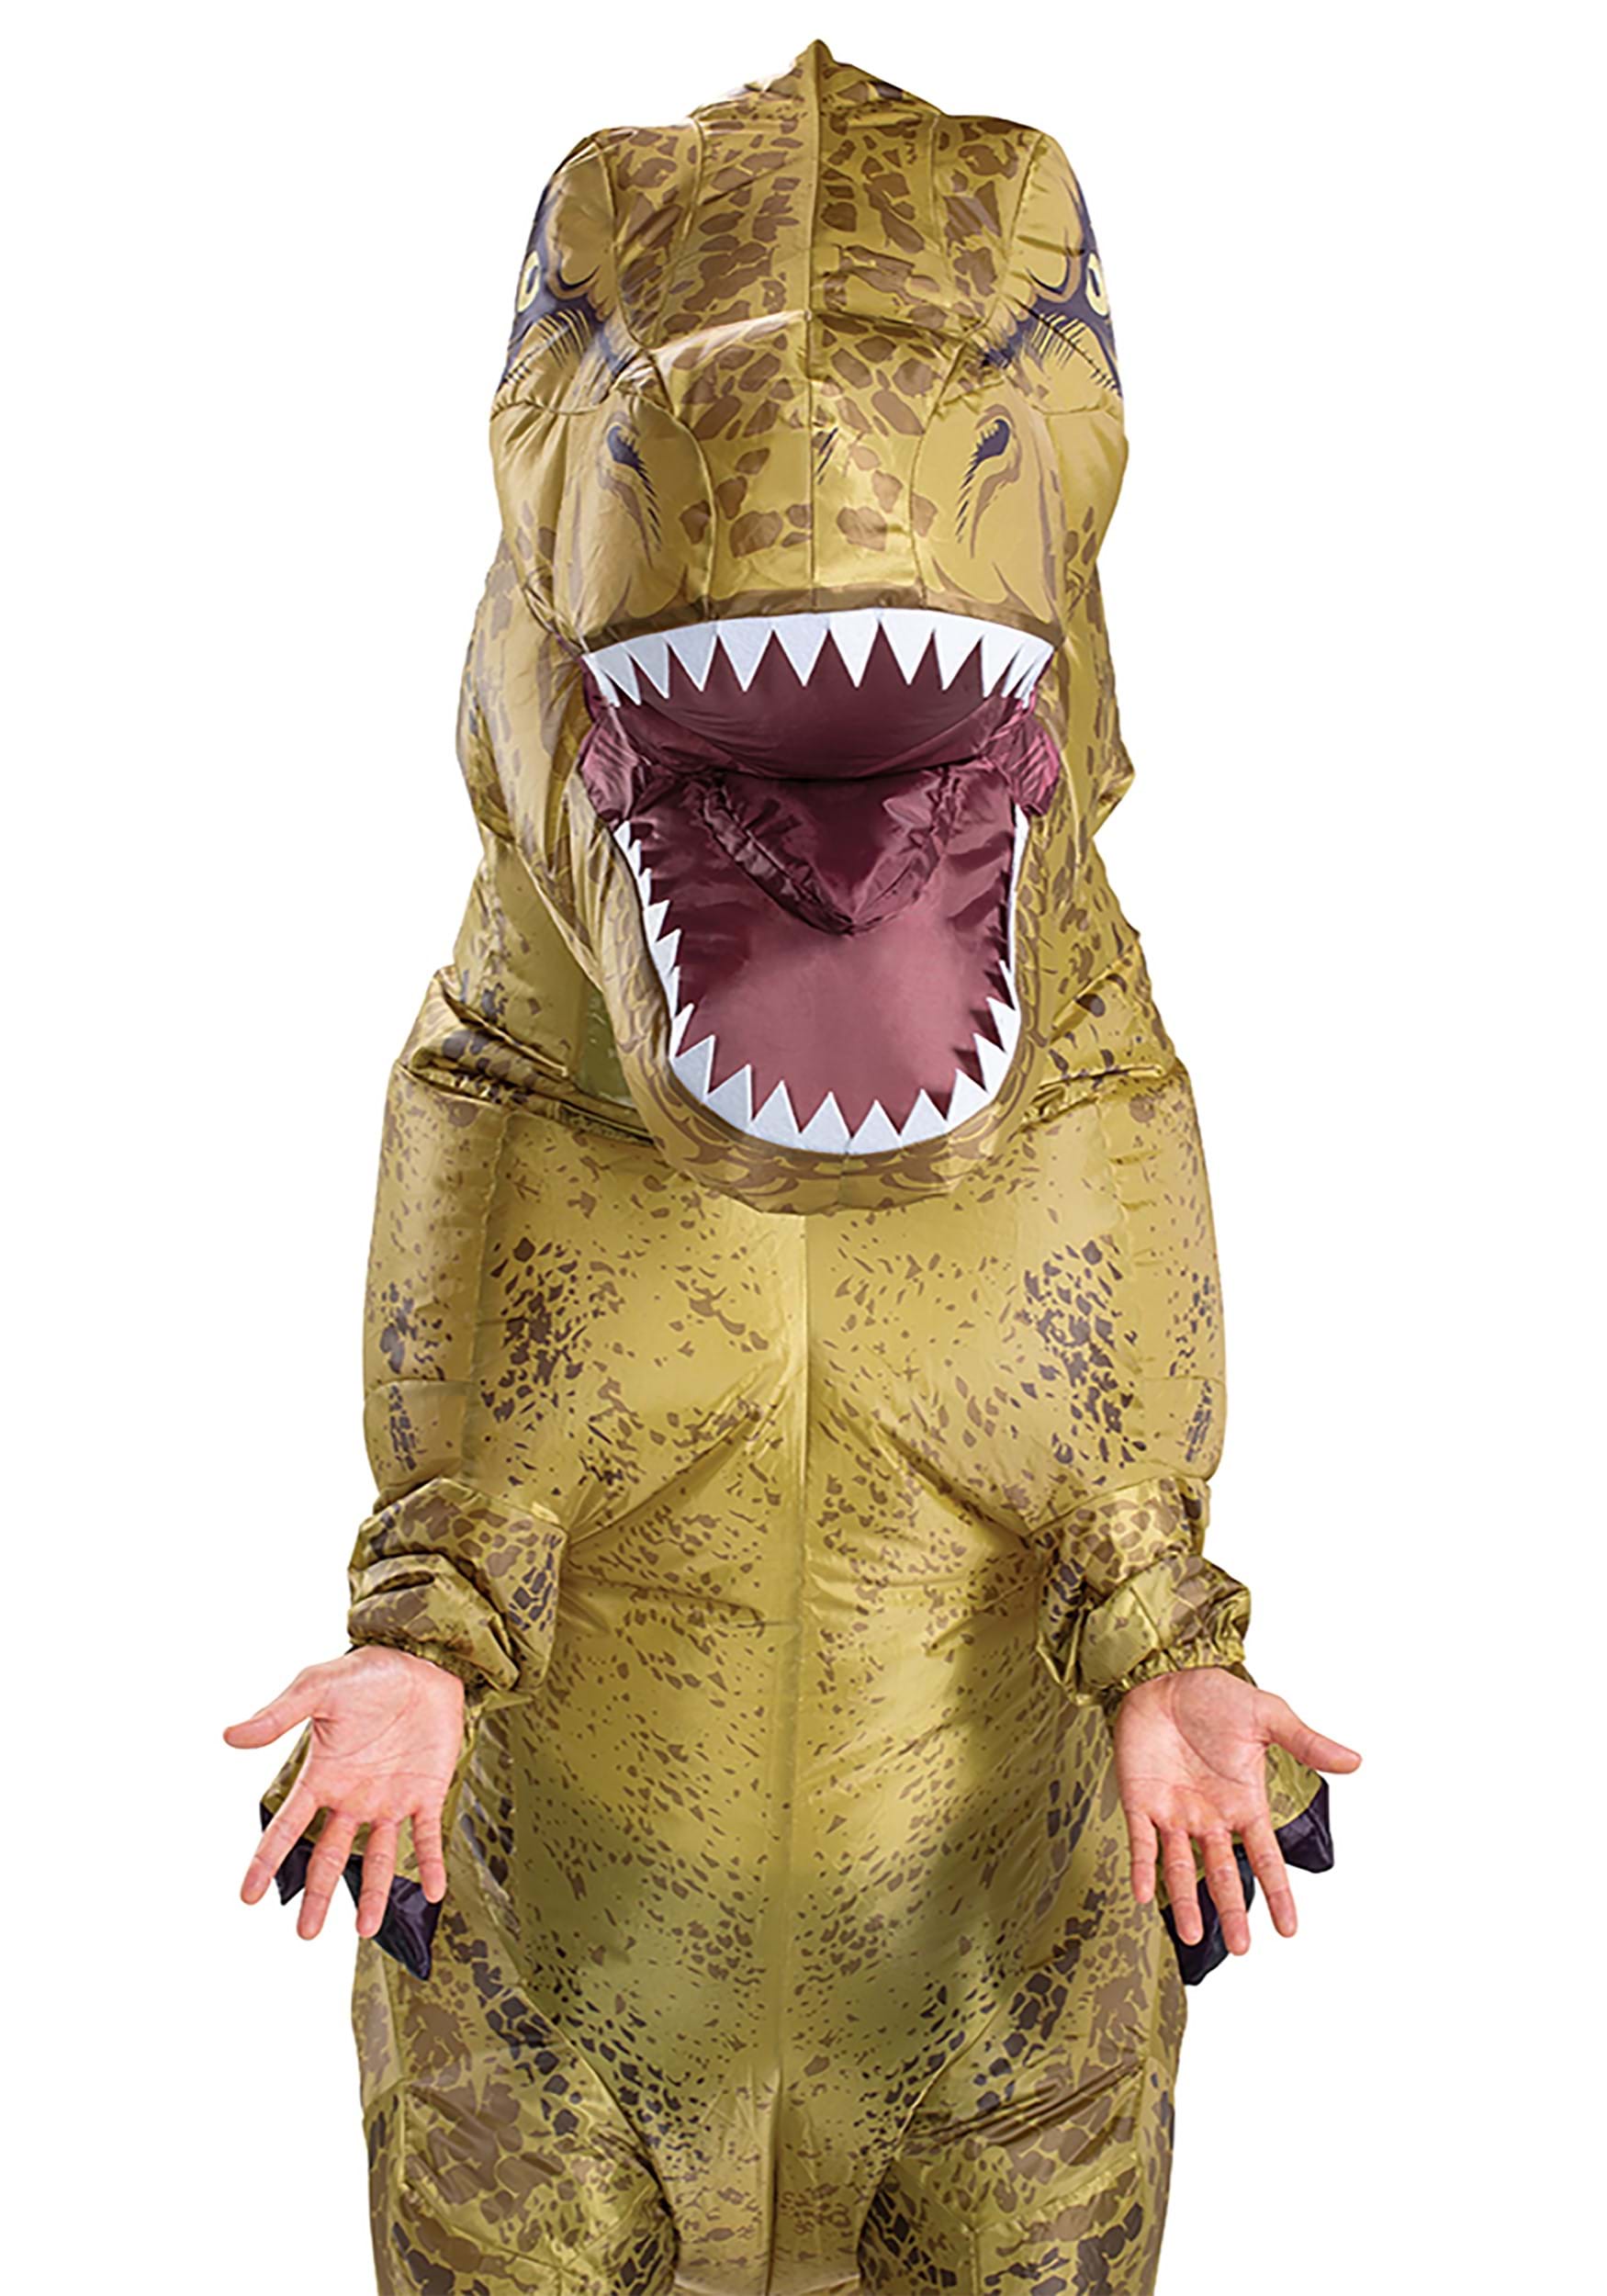 Bring JURASSIC WORLD DOMINION Home with Giant Inflatable T. Rex